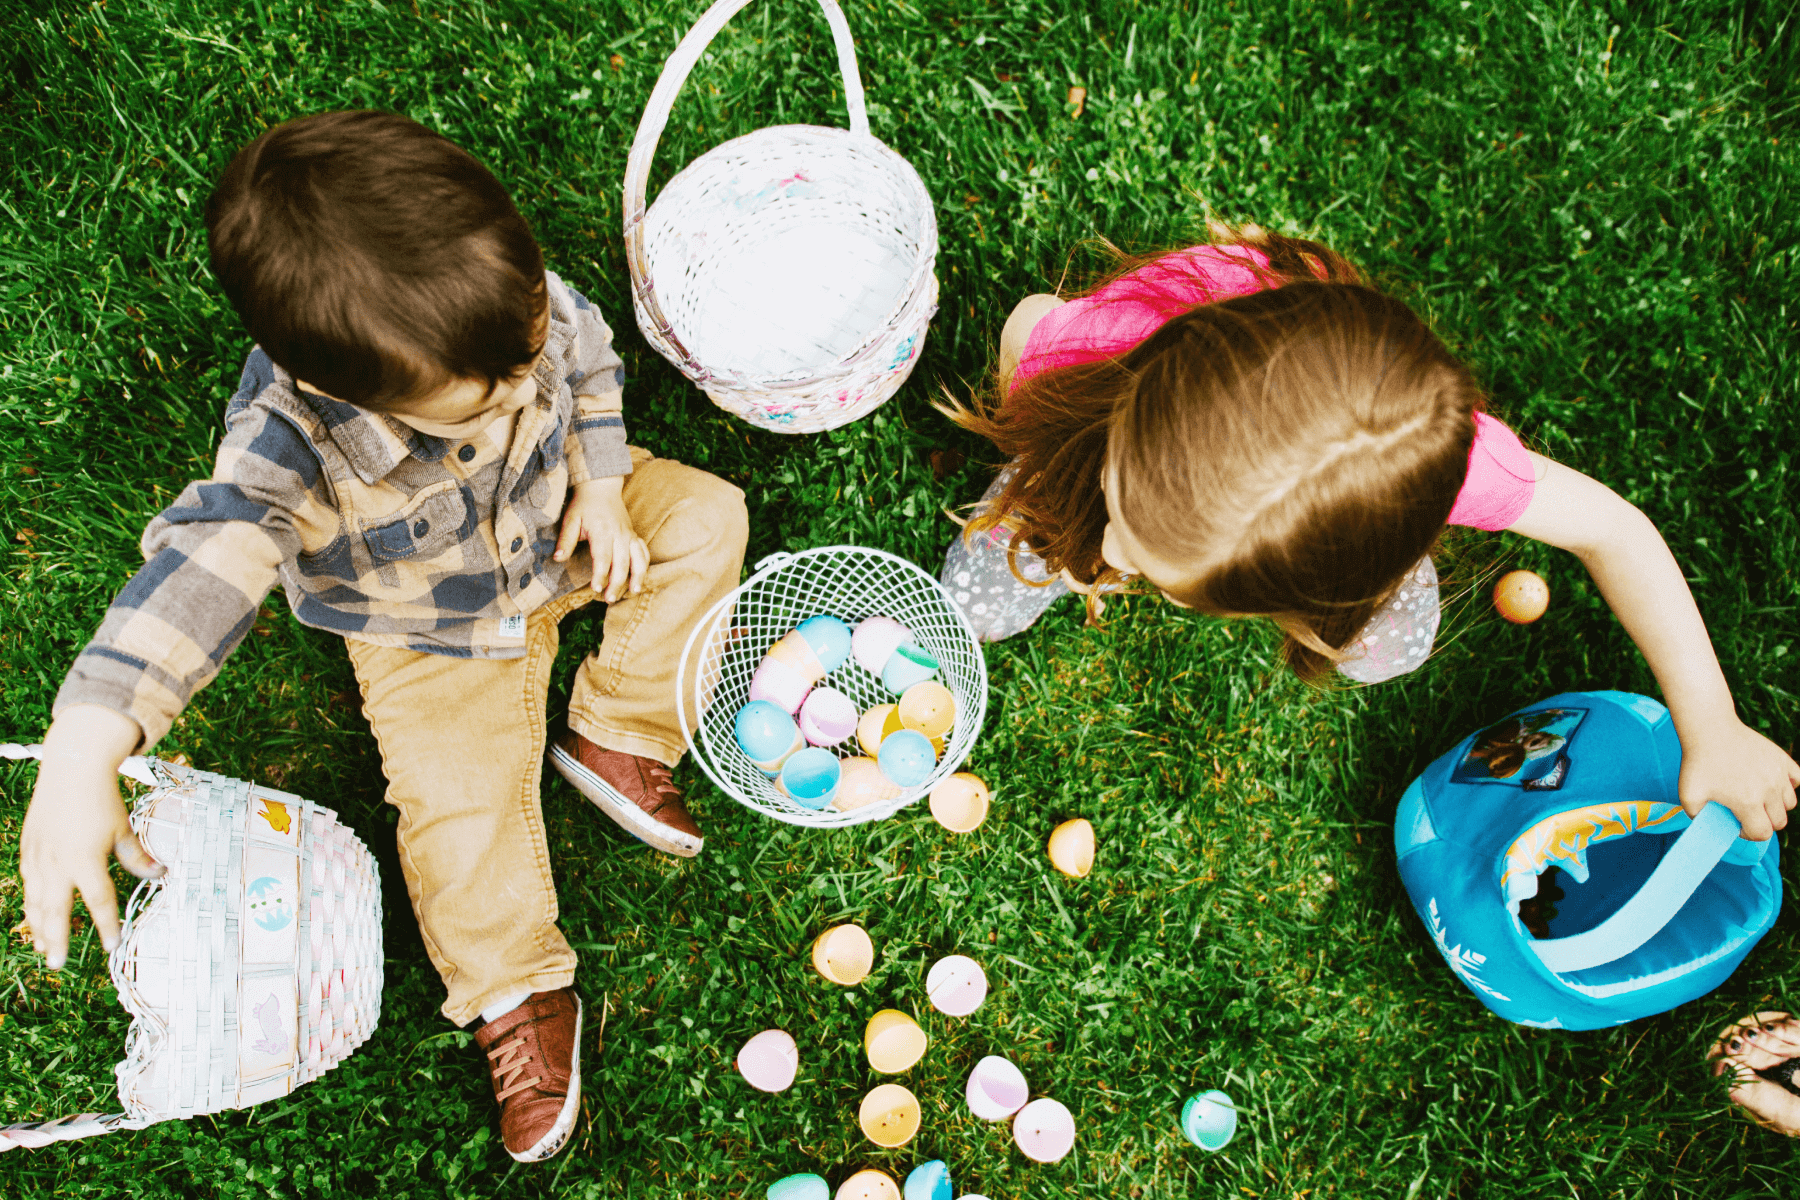 An overhead shot of two children in grass with Easter baskets and colorful plastic eggs.